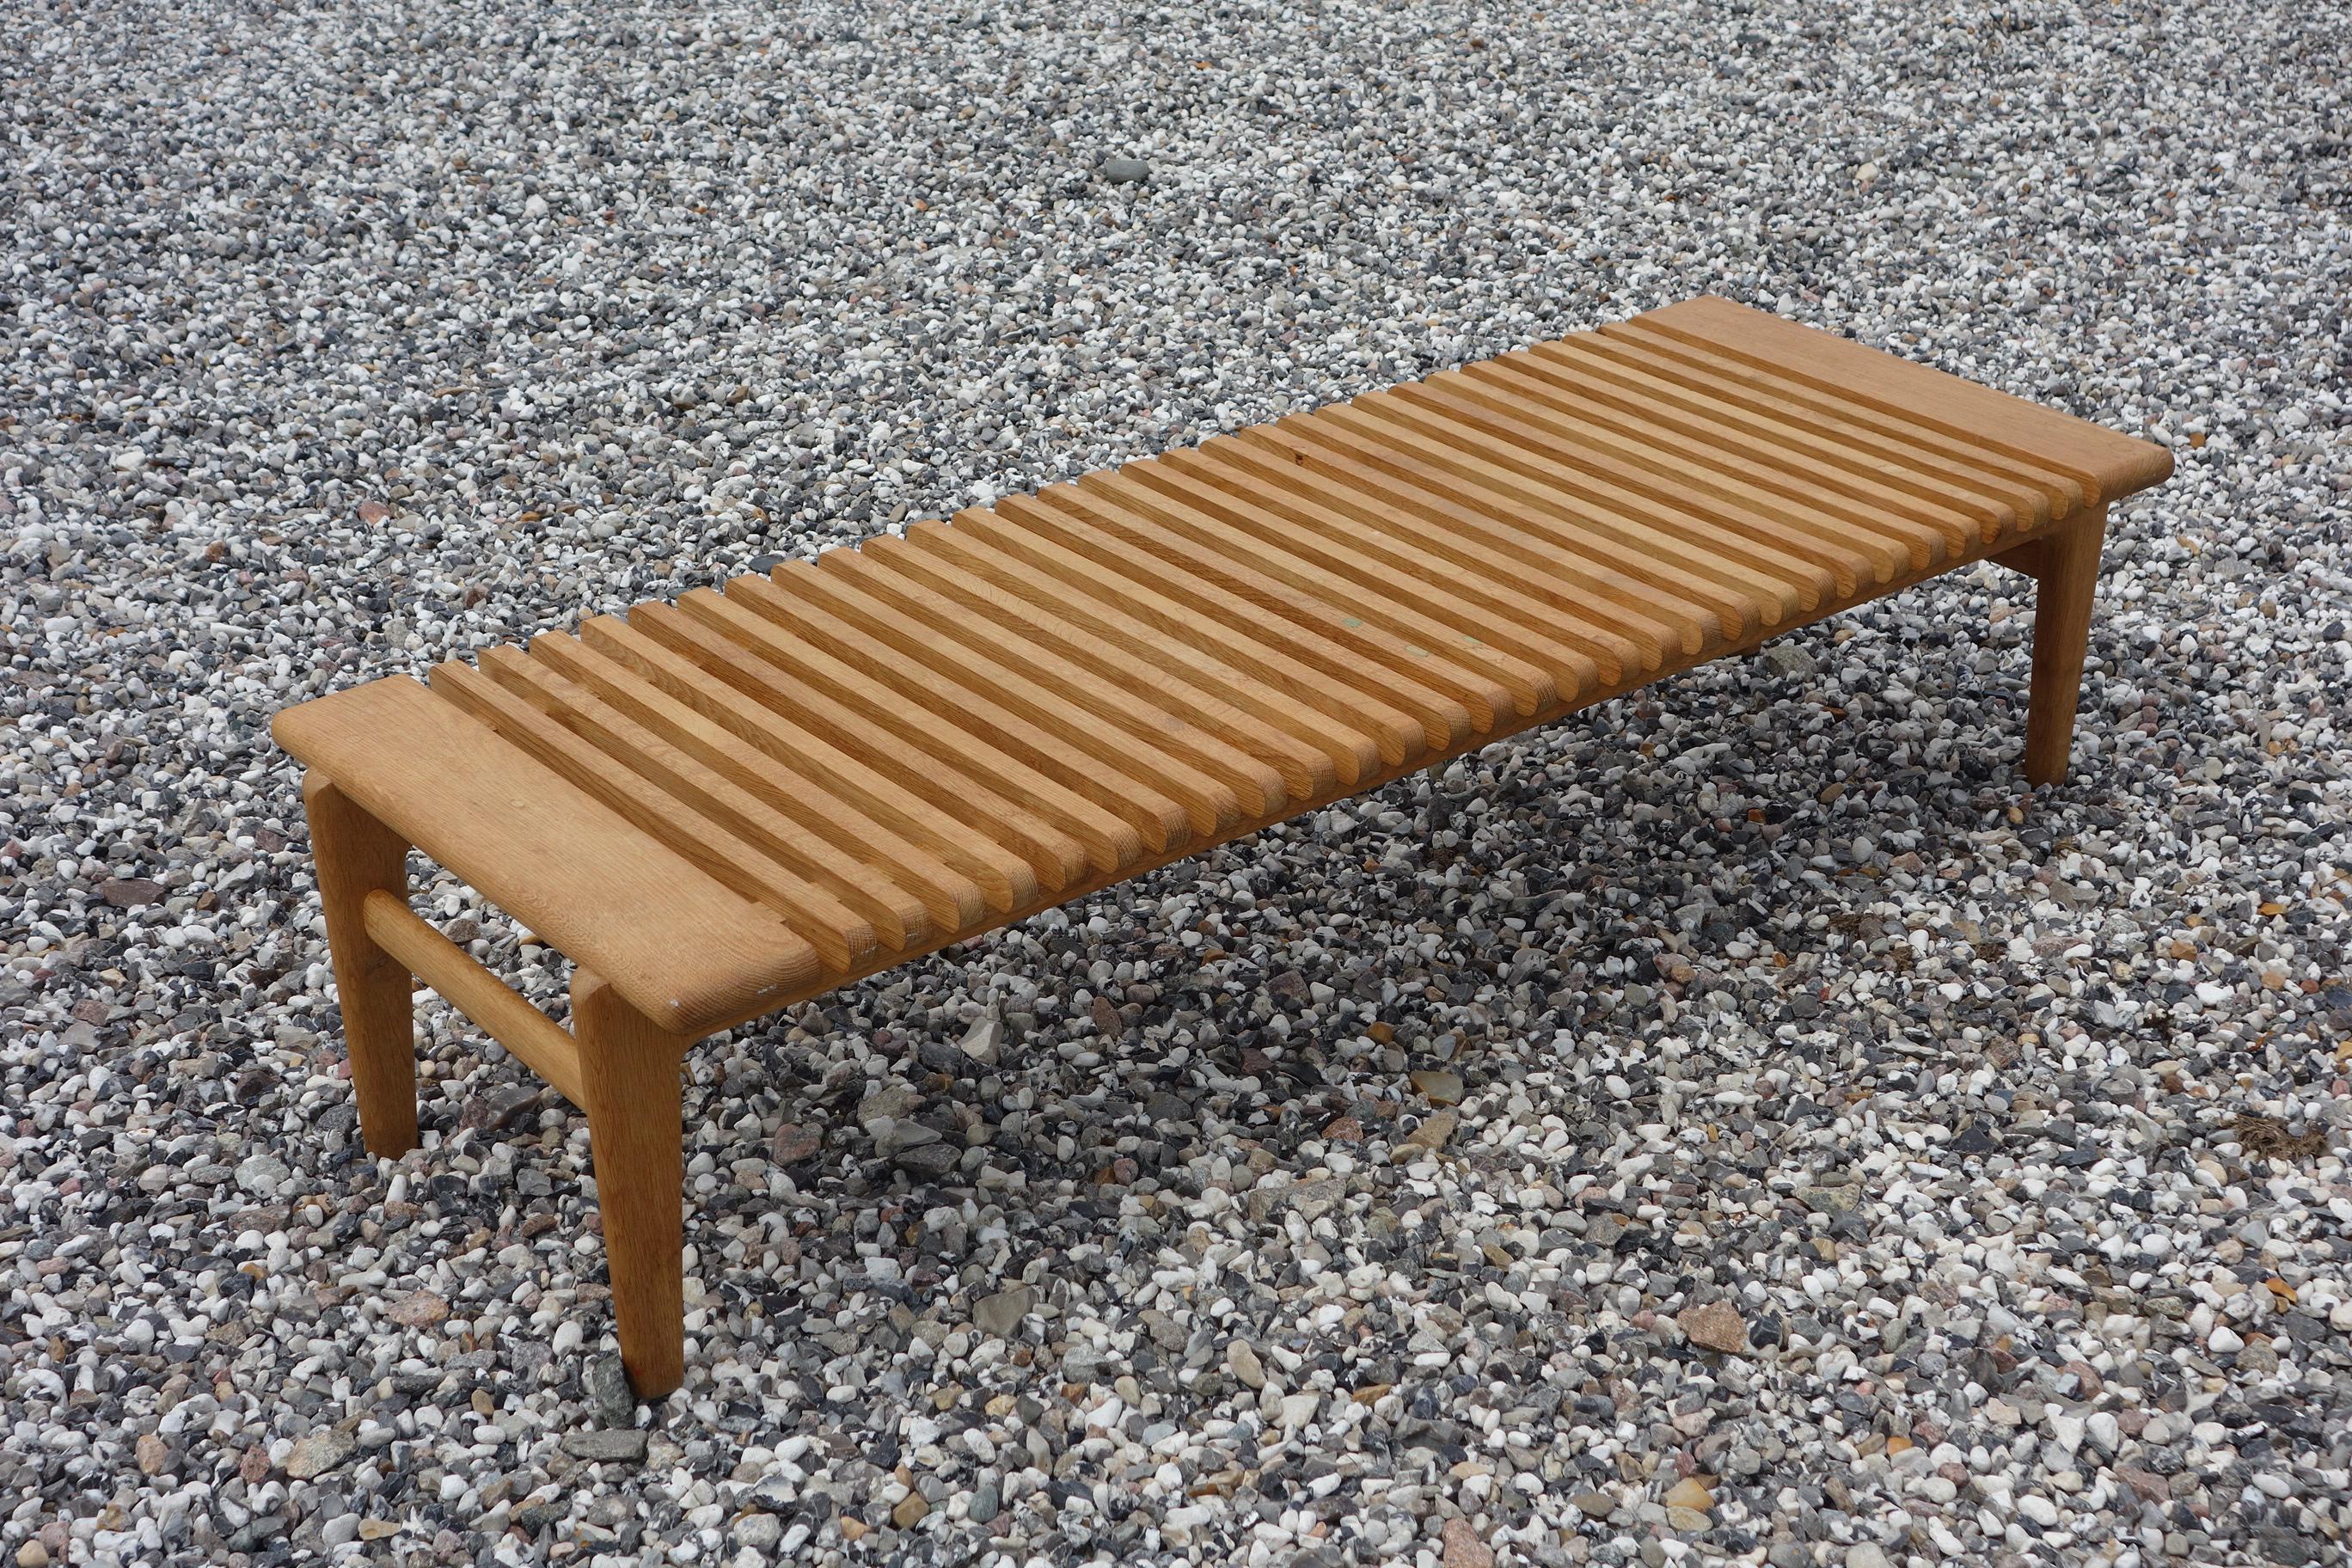 Hans J. Wegner 1914-2007. Bench made of solid oak with nice grain. Designed in 1953 and made by Johannes Hansen. Measures: H. 31 cm, L. 140 cm, D. 51 cm.